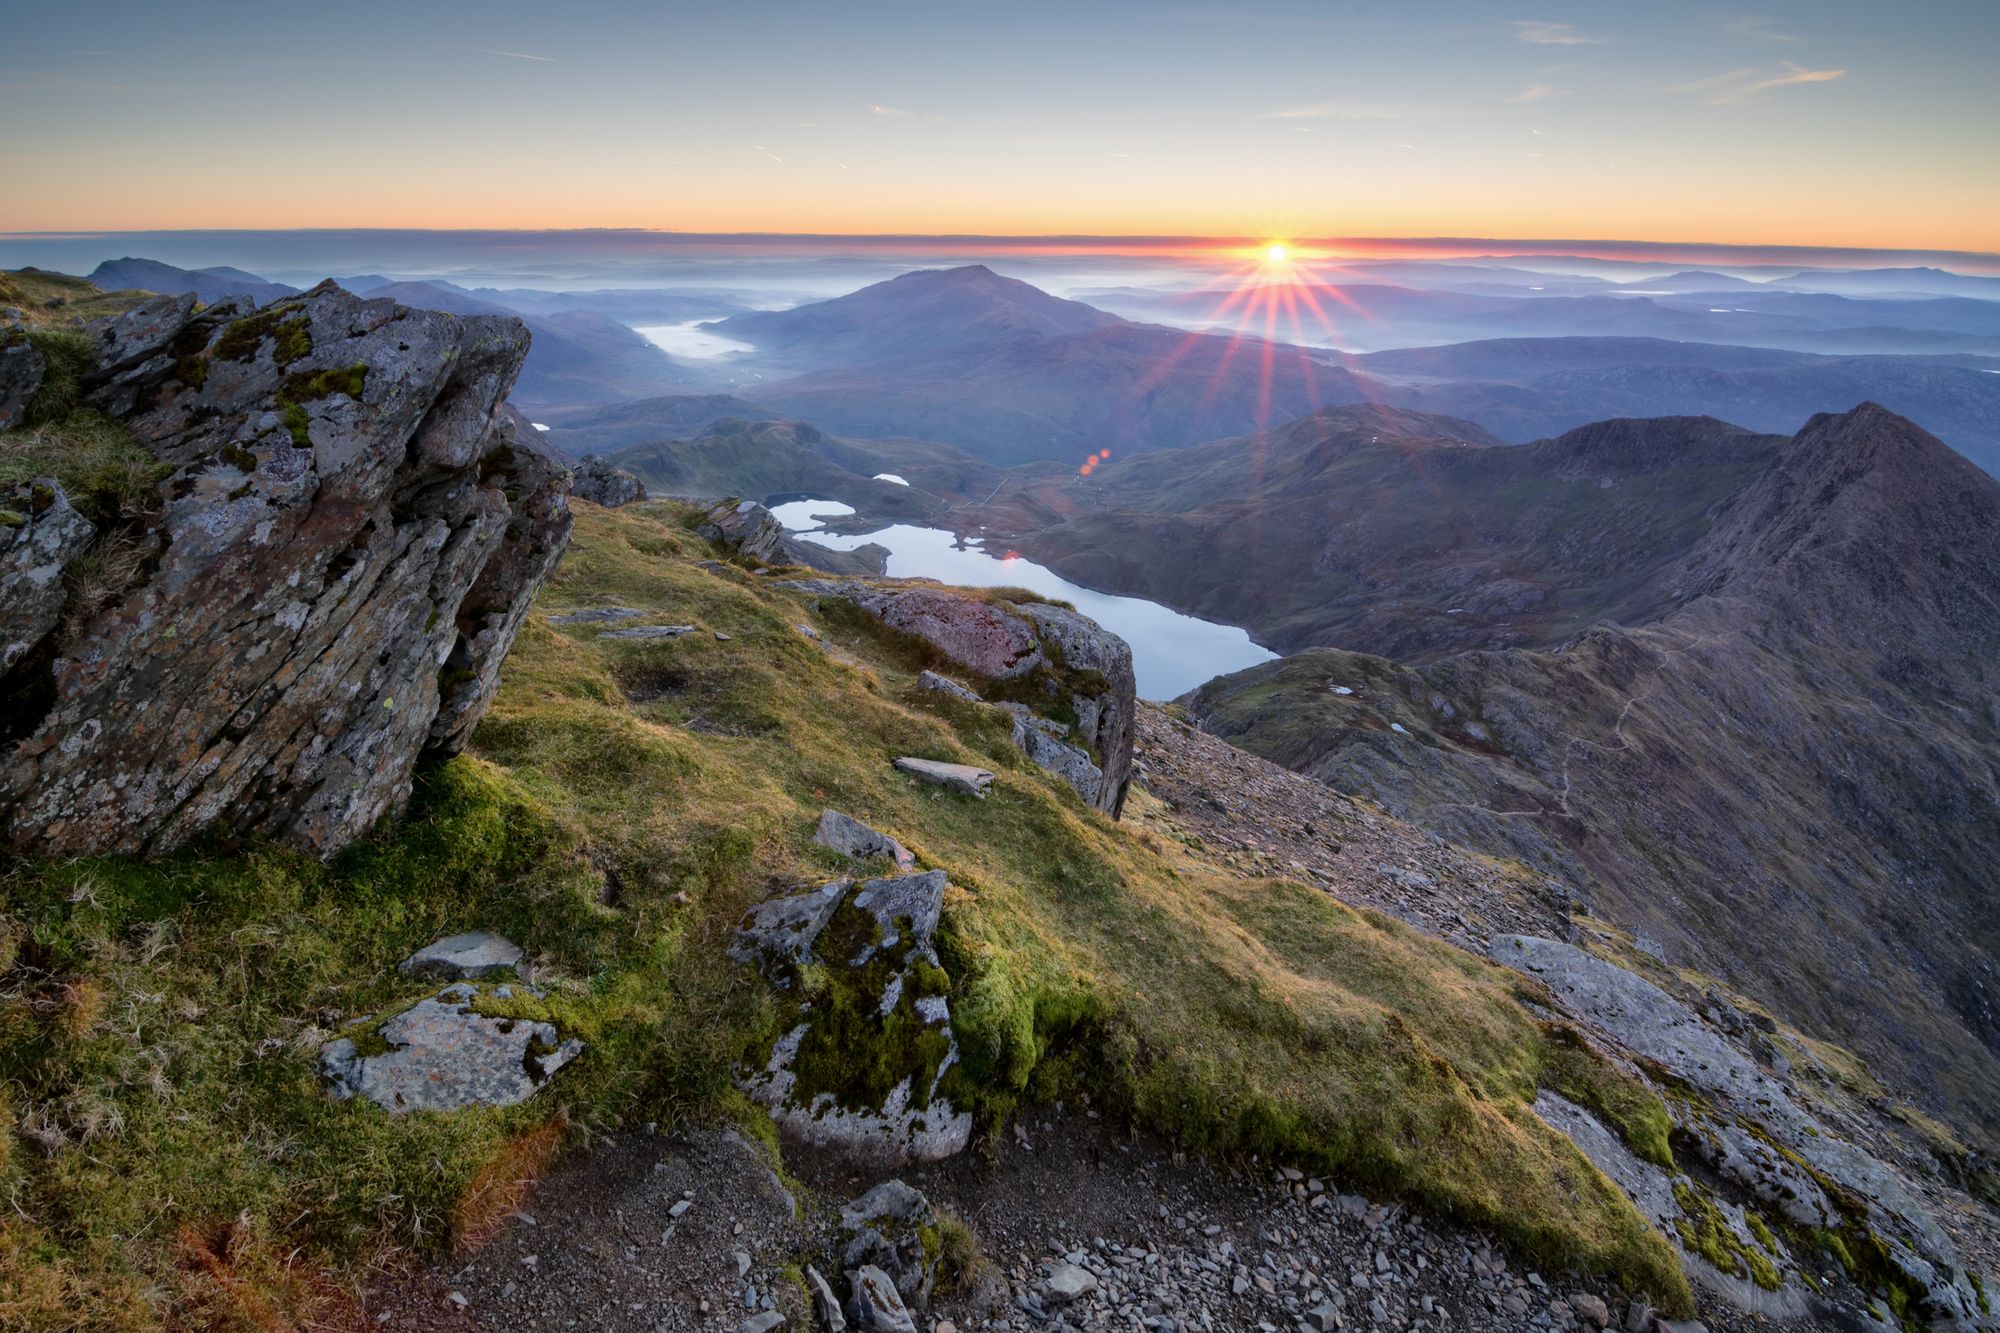 The Snowdon Horseshoe, view of the mountain at sunrise.